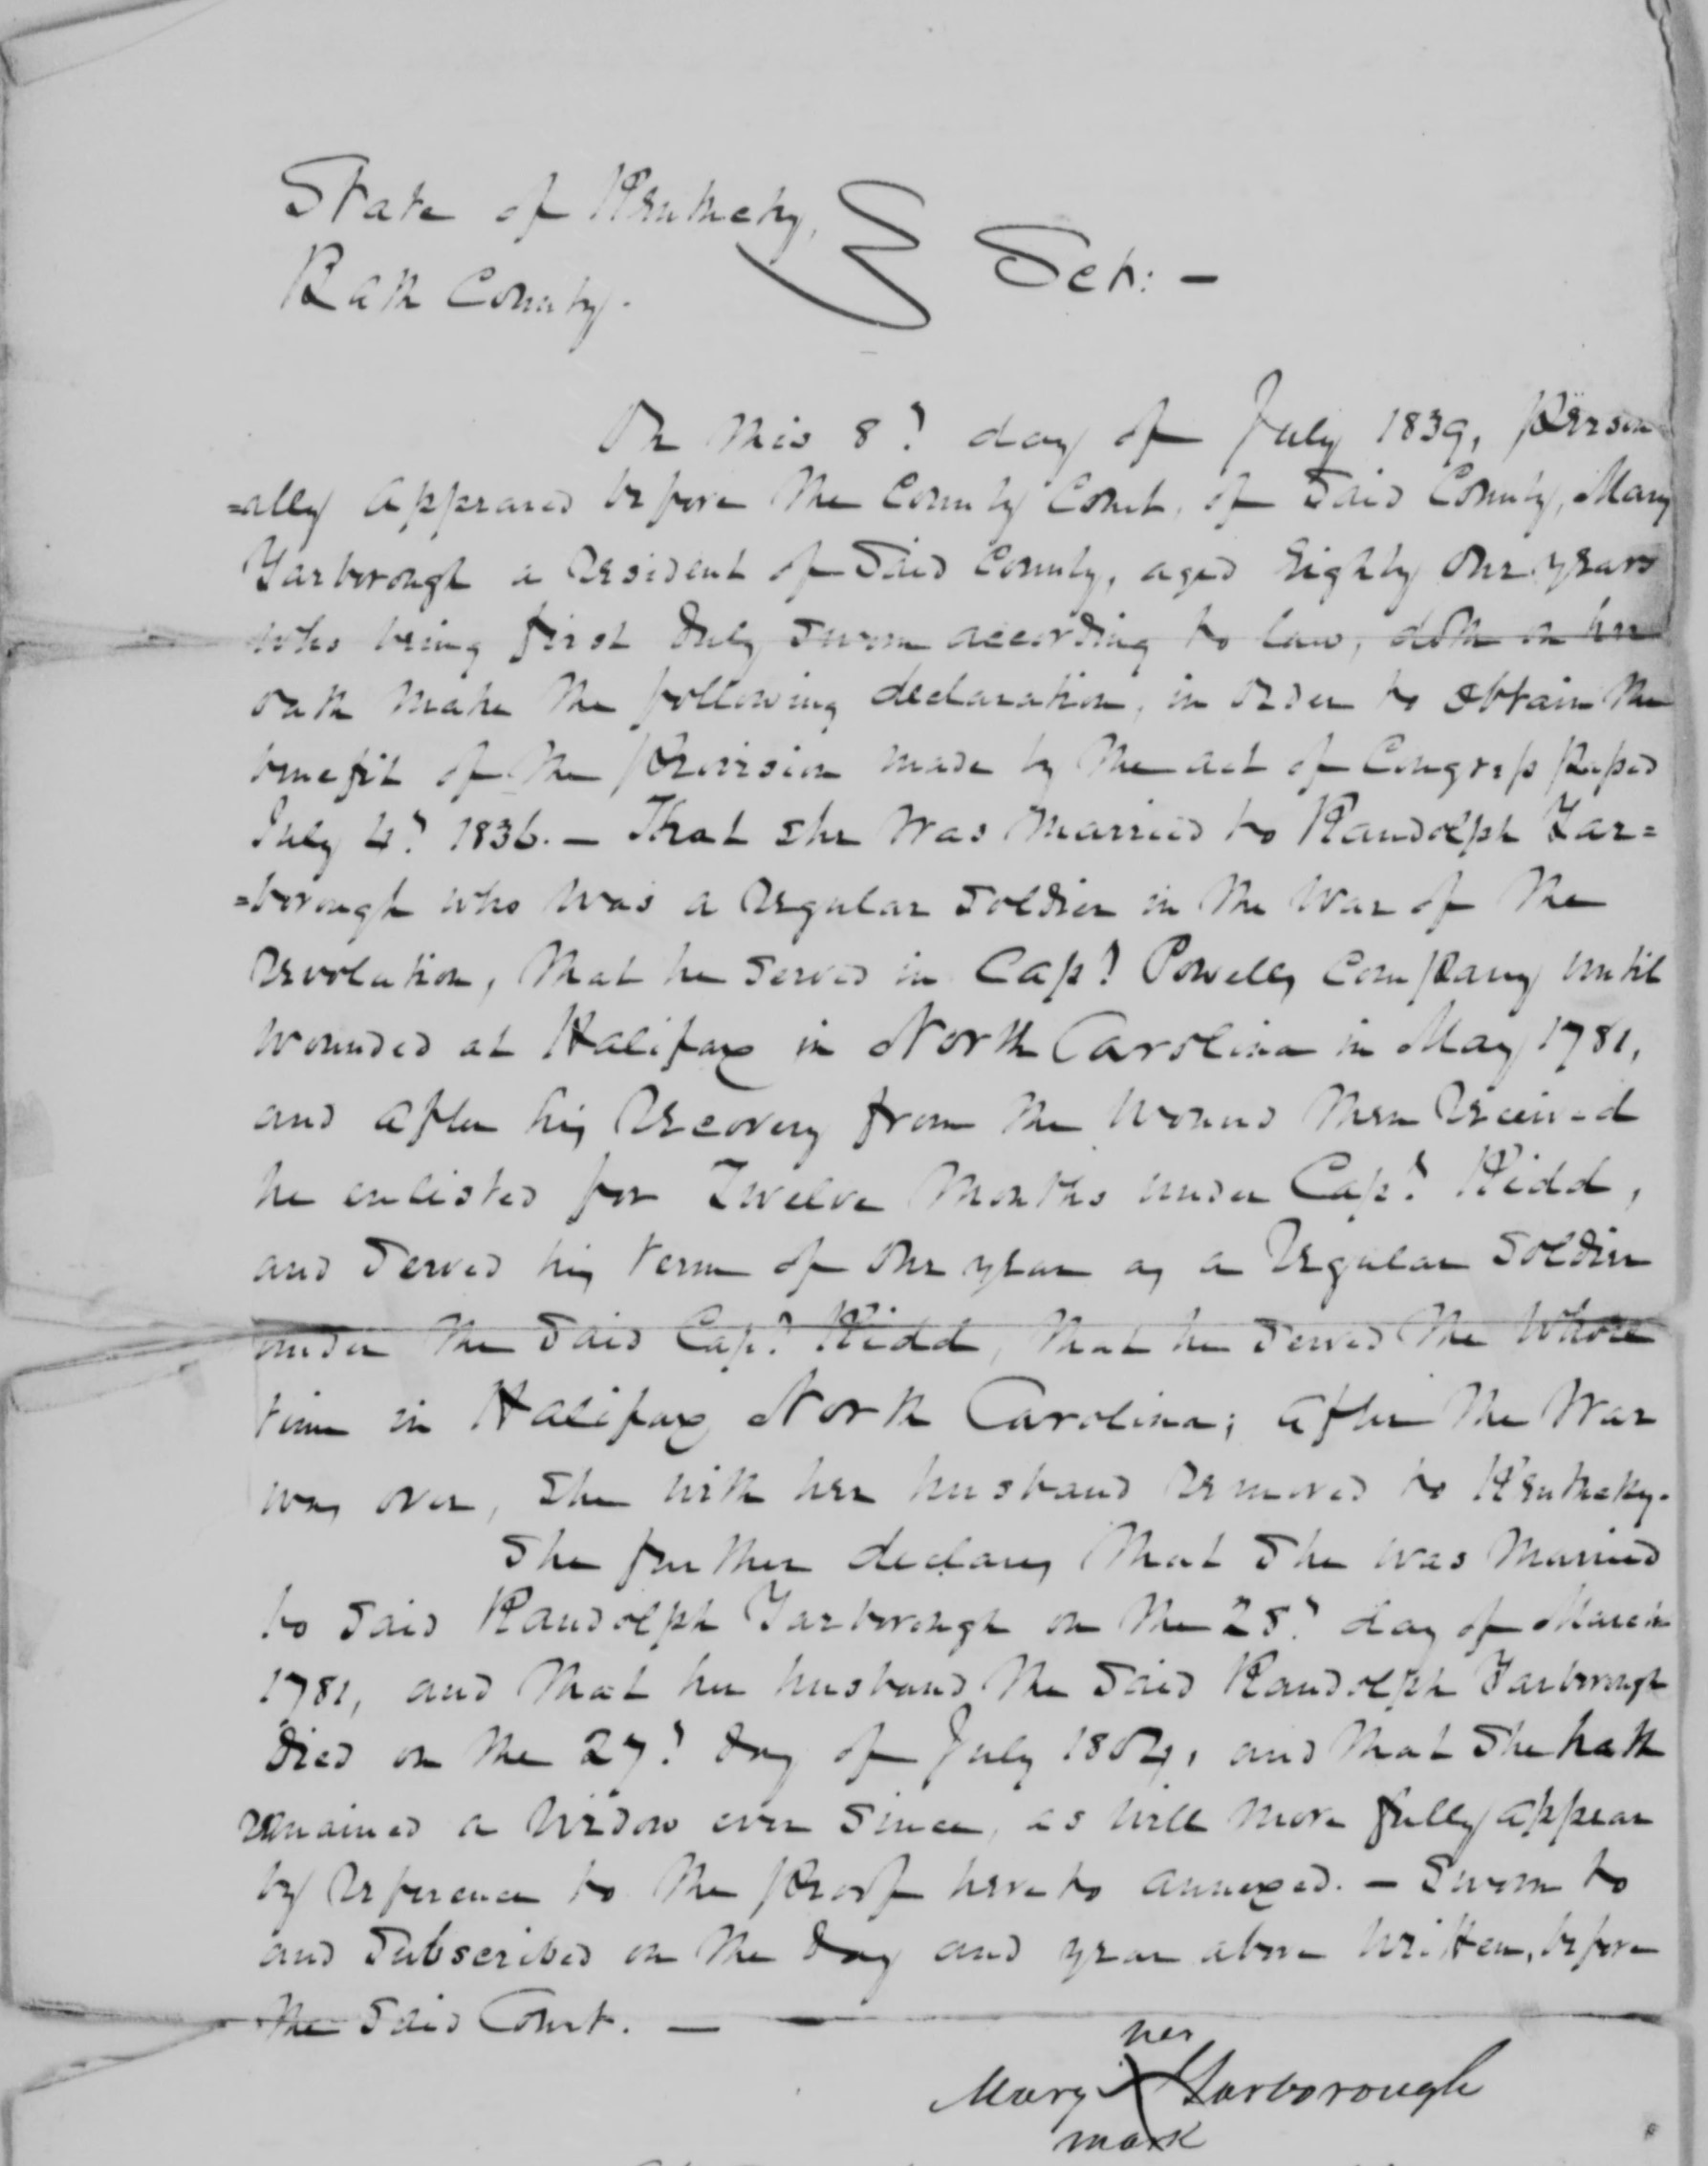 Application for a Widow's Pension from Mary Yarborough, 8 July 1839, page 1